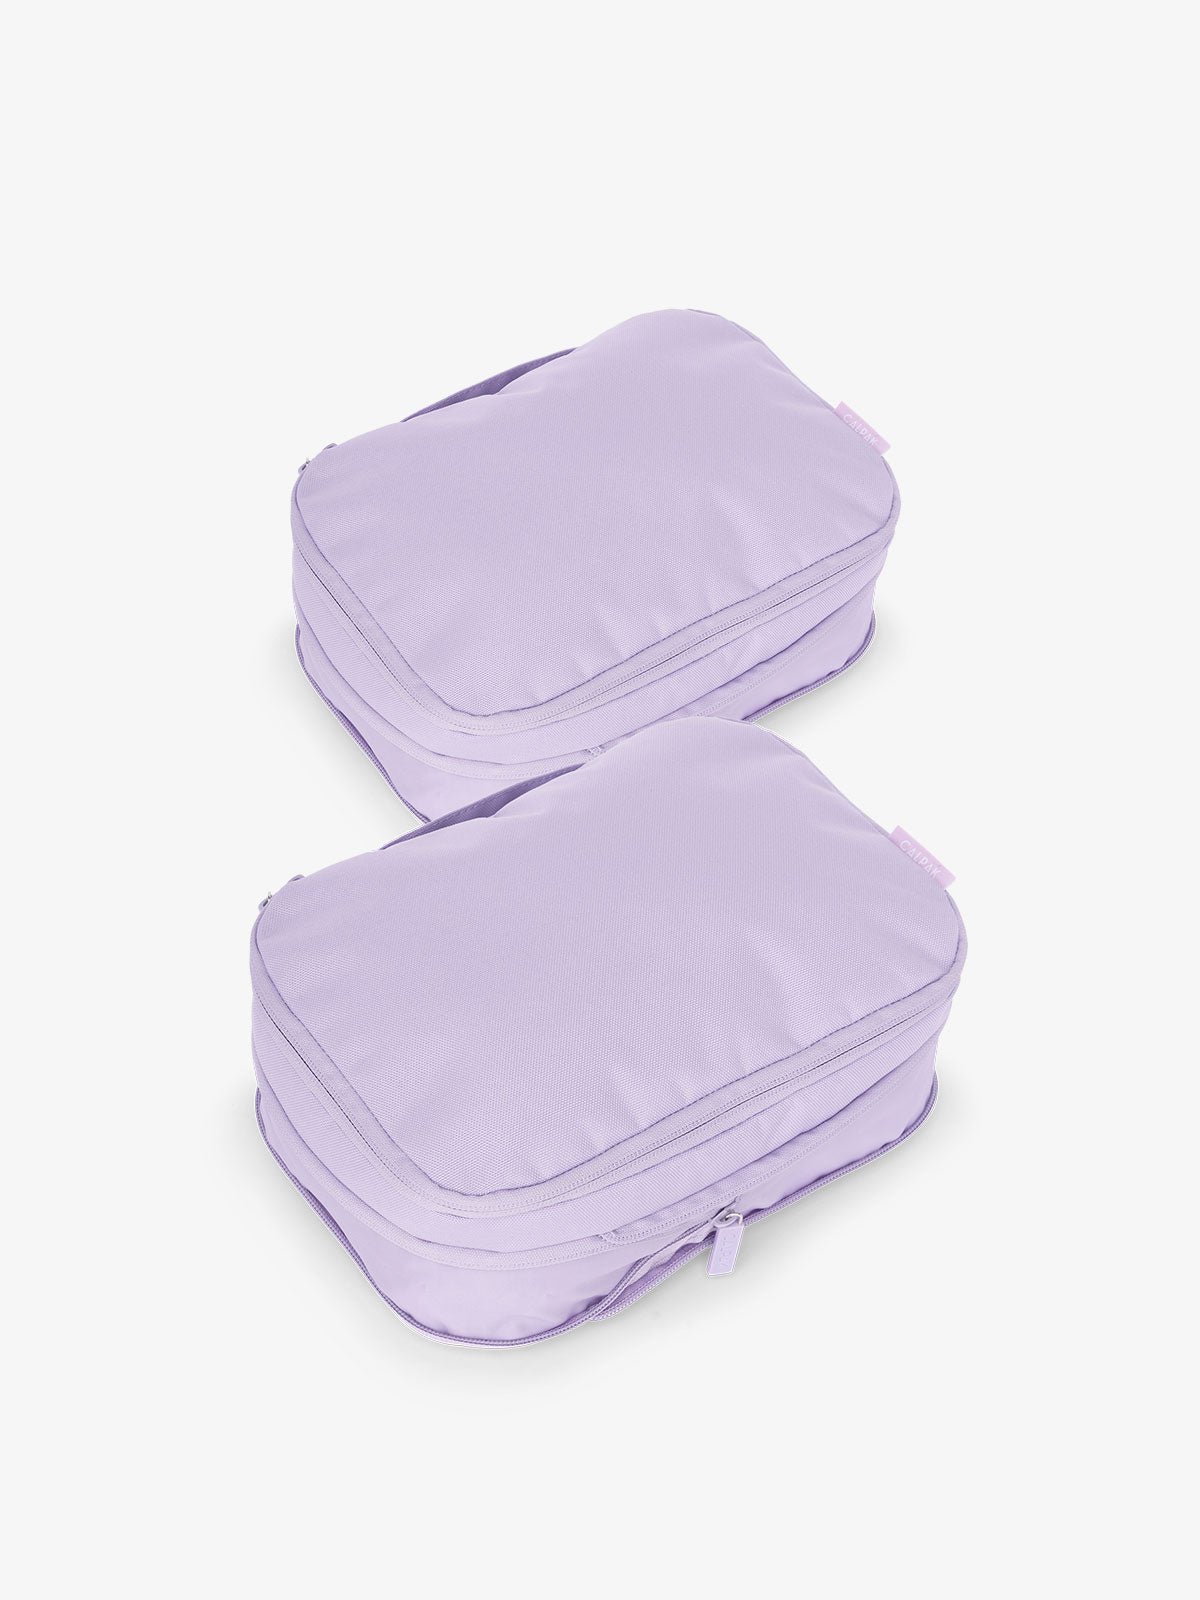 CALPAK small compression packing cubes with top handles and expandable by 4.5 inches in purple orchid